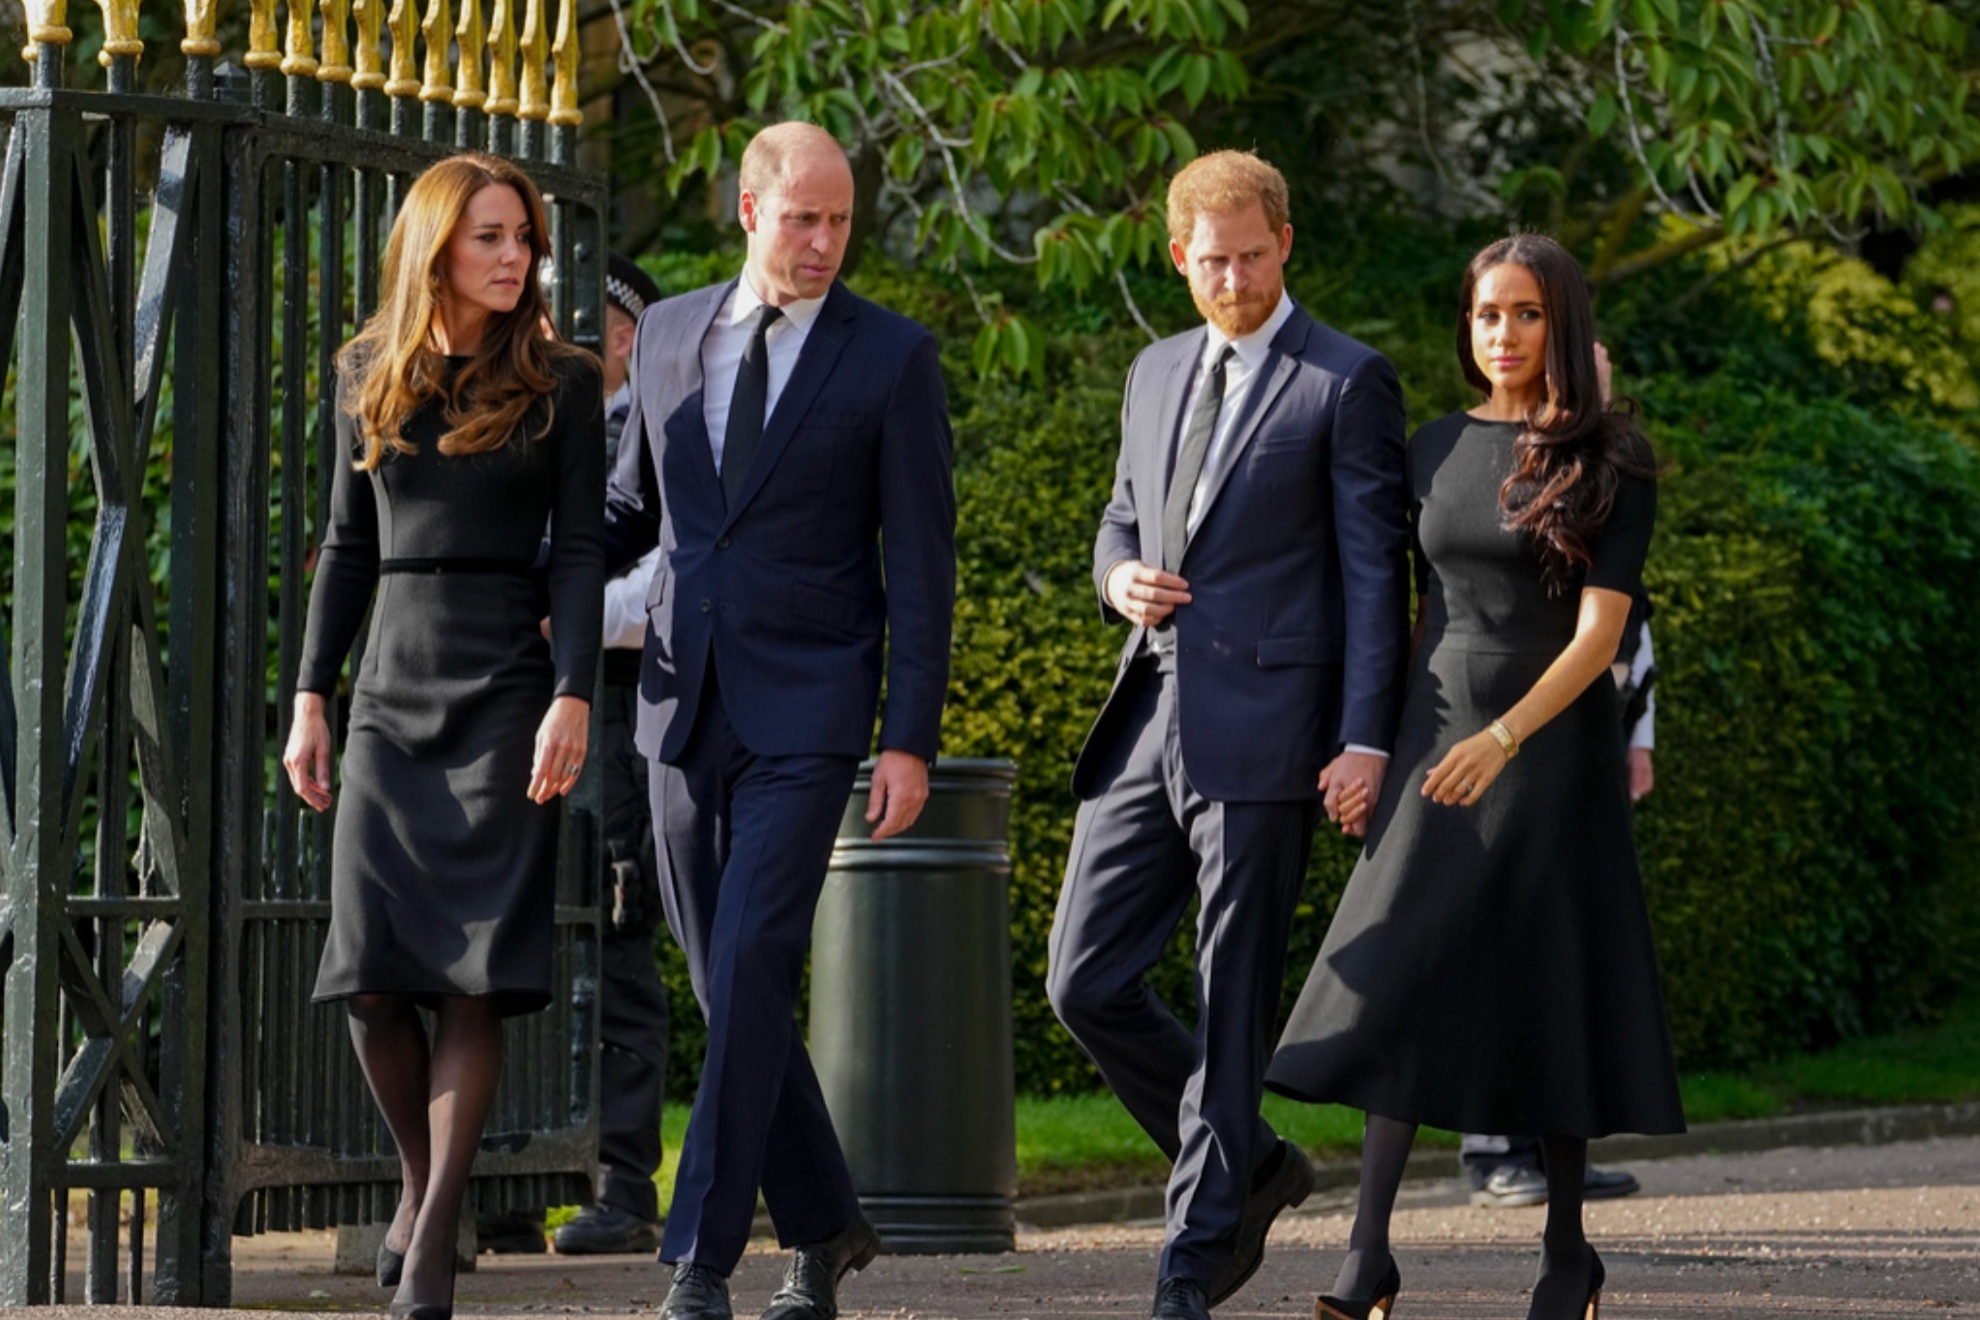 From left: Kate Middleton, Prince William, Prince Harry, and Meghan Markle, viewing the floral tributes for the late Queen Elizabeth II.